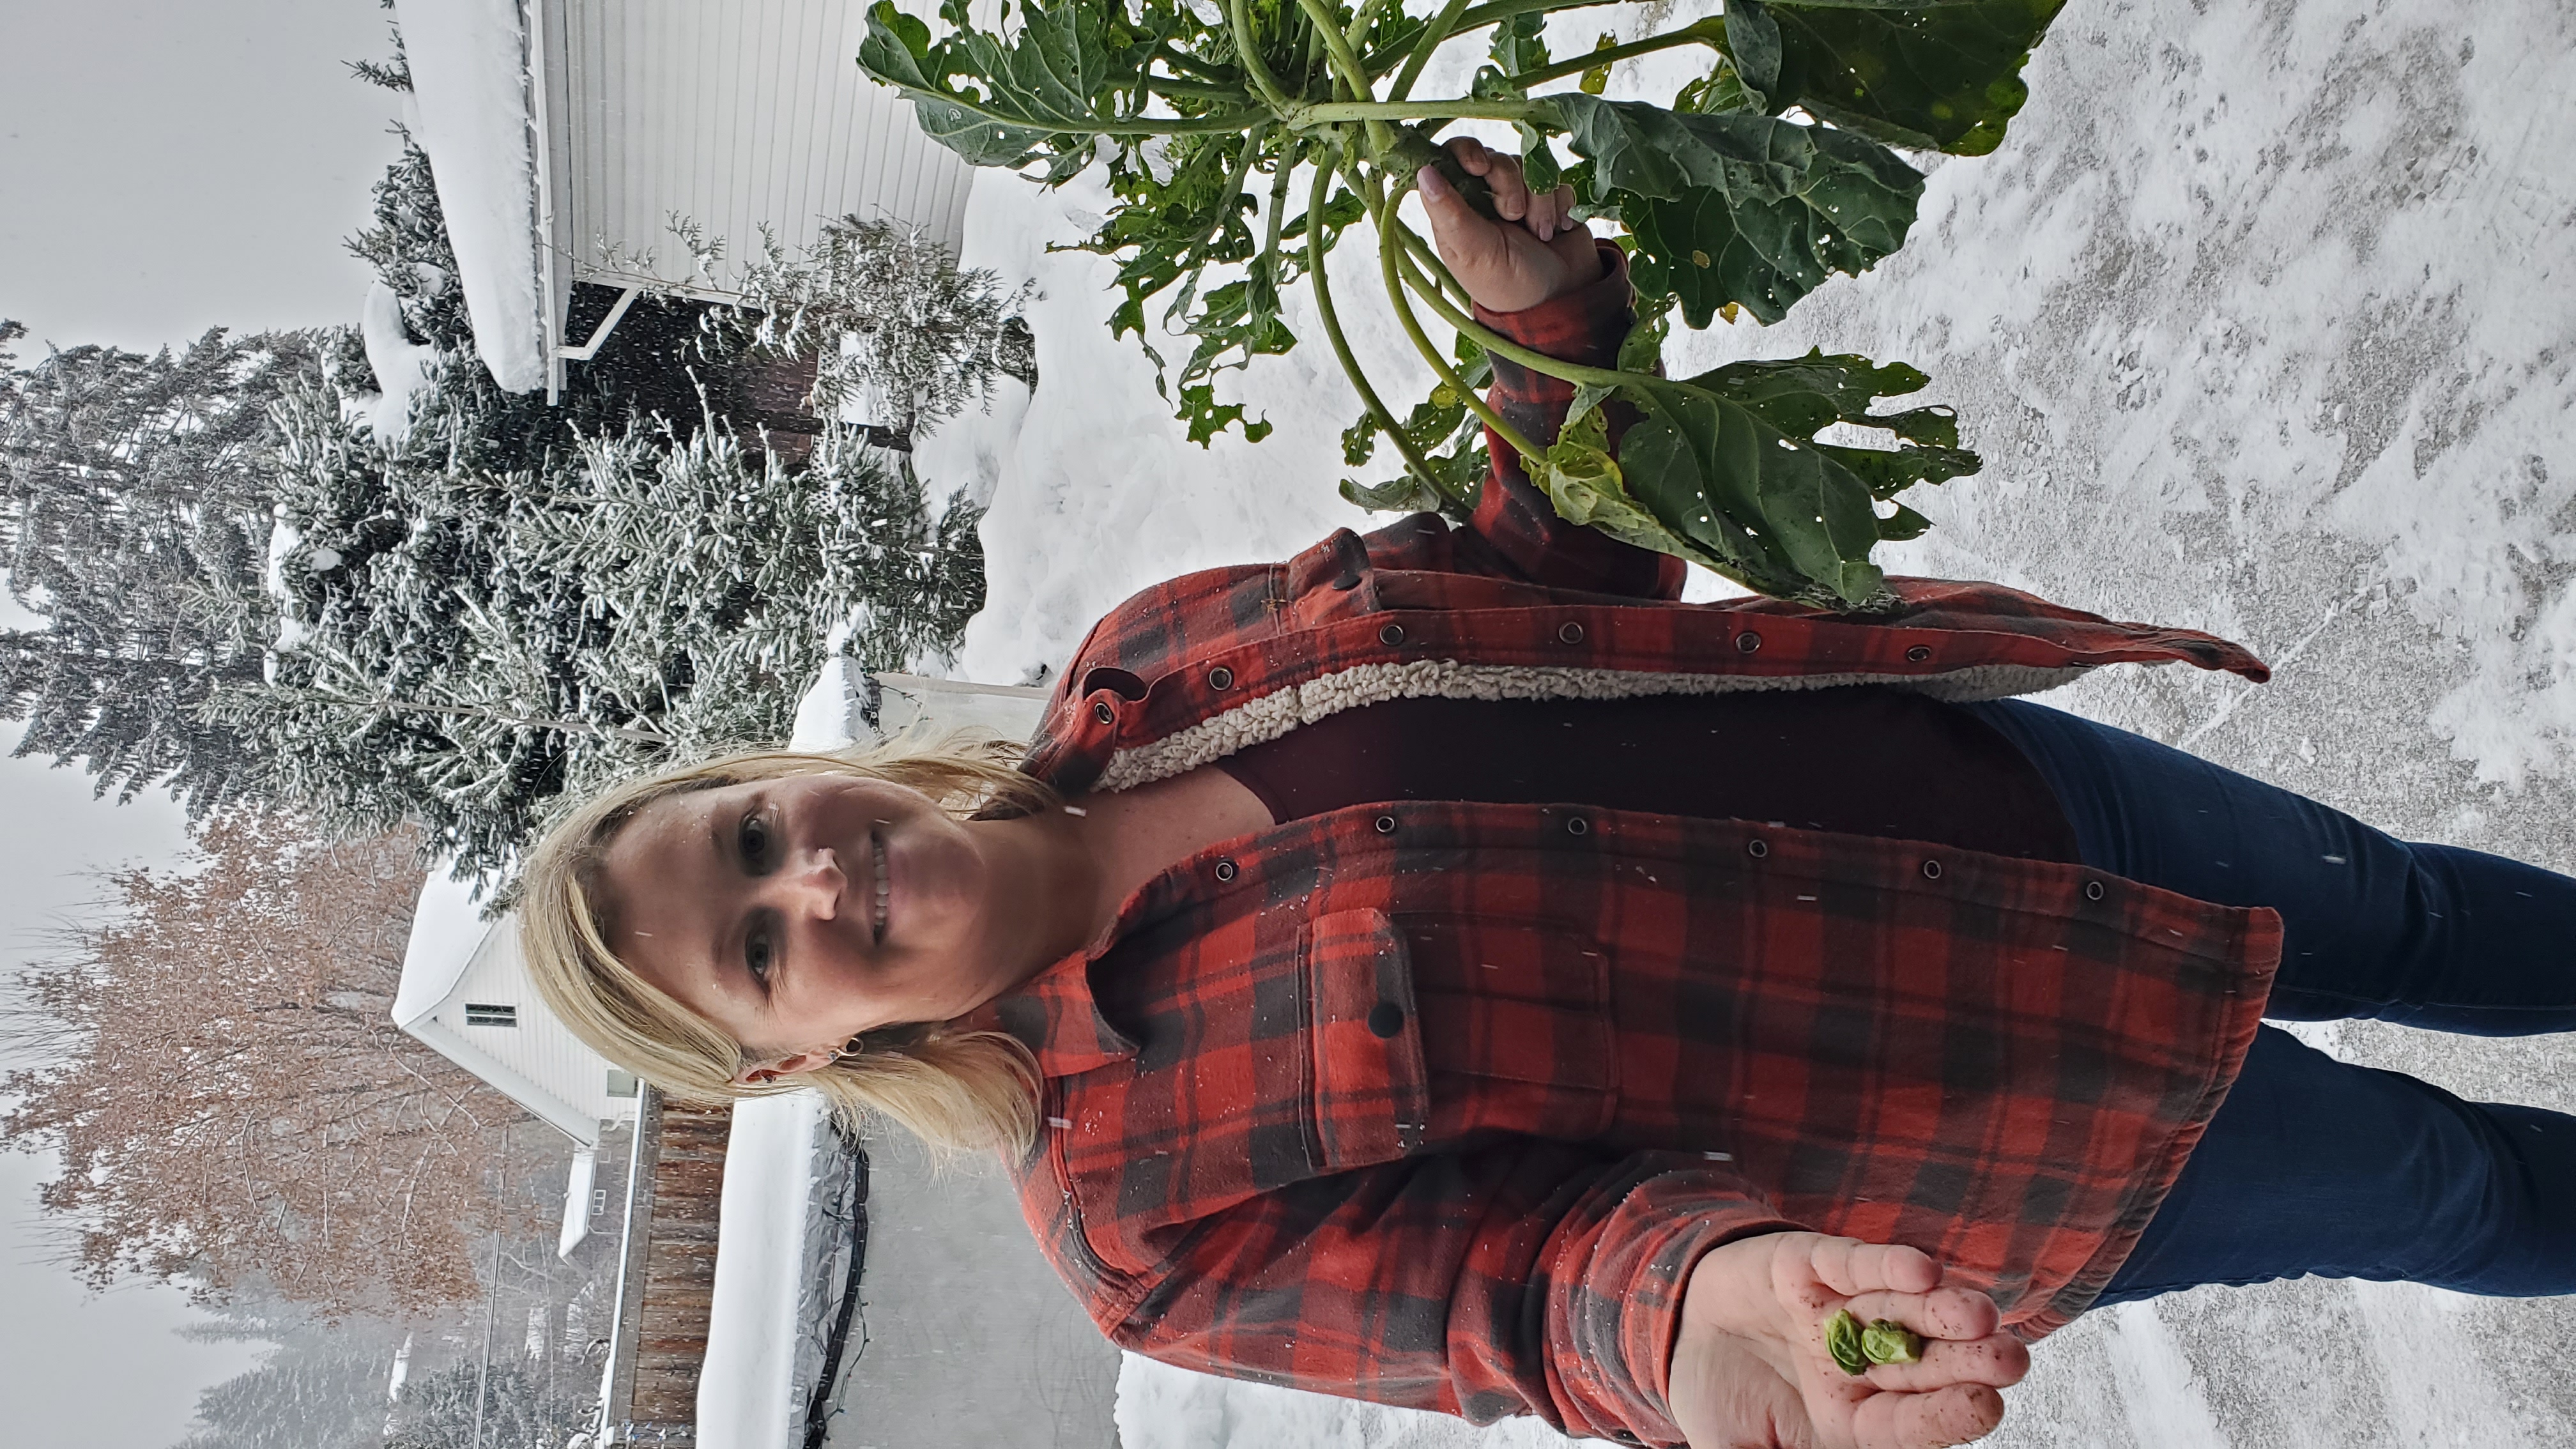 Blonde woman wearing red plaid shirt in winter garden showing failed Brussels sprouts in her hand